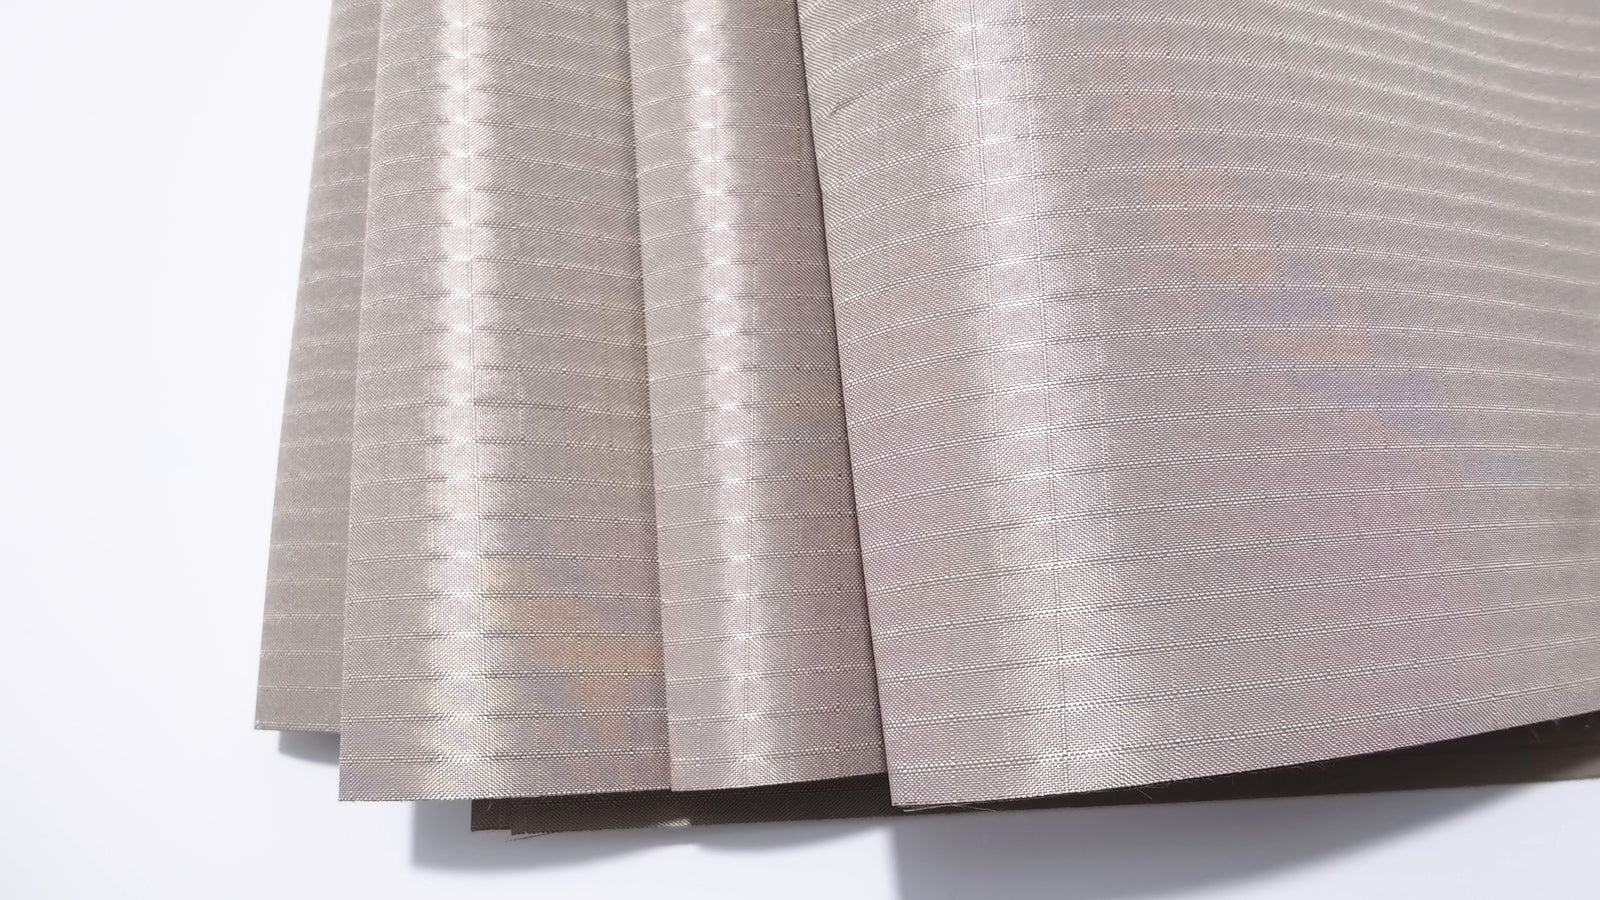 5G EMF Blocking Fabric for Electromagnetic Shielding Effectiveness Military Grade Copper Fabric Harder than Normal